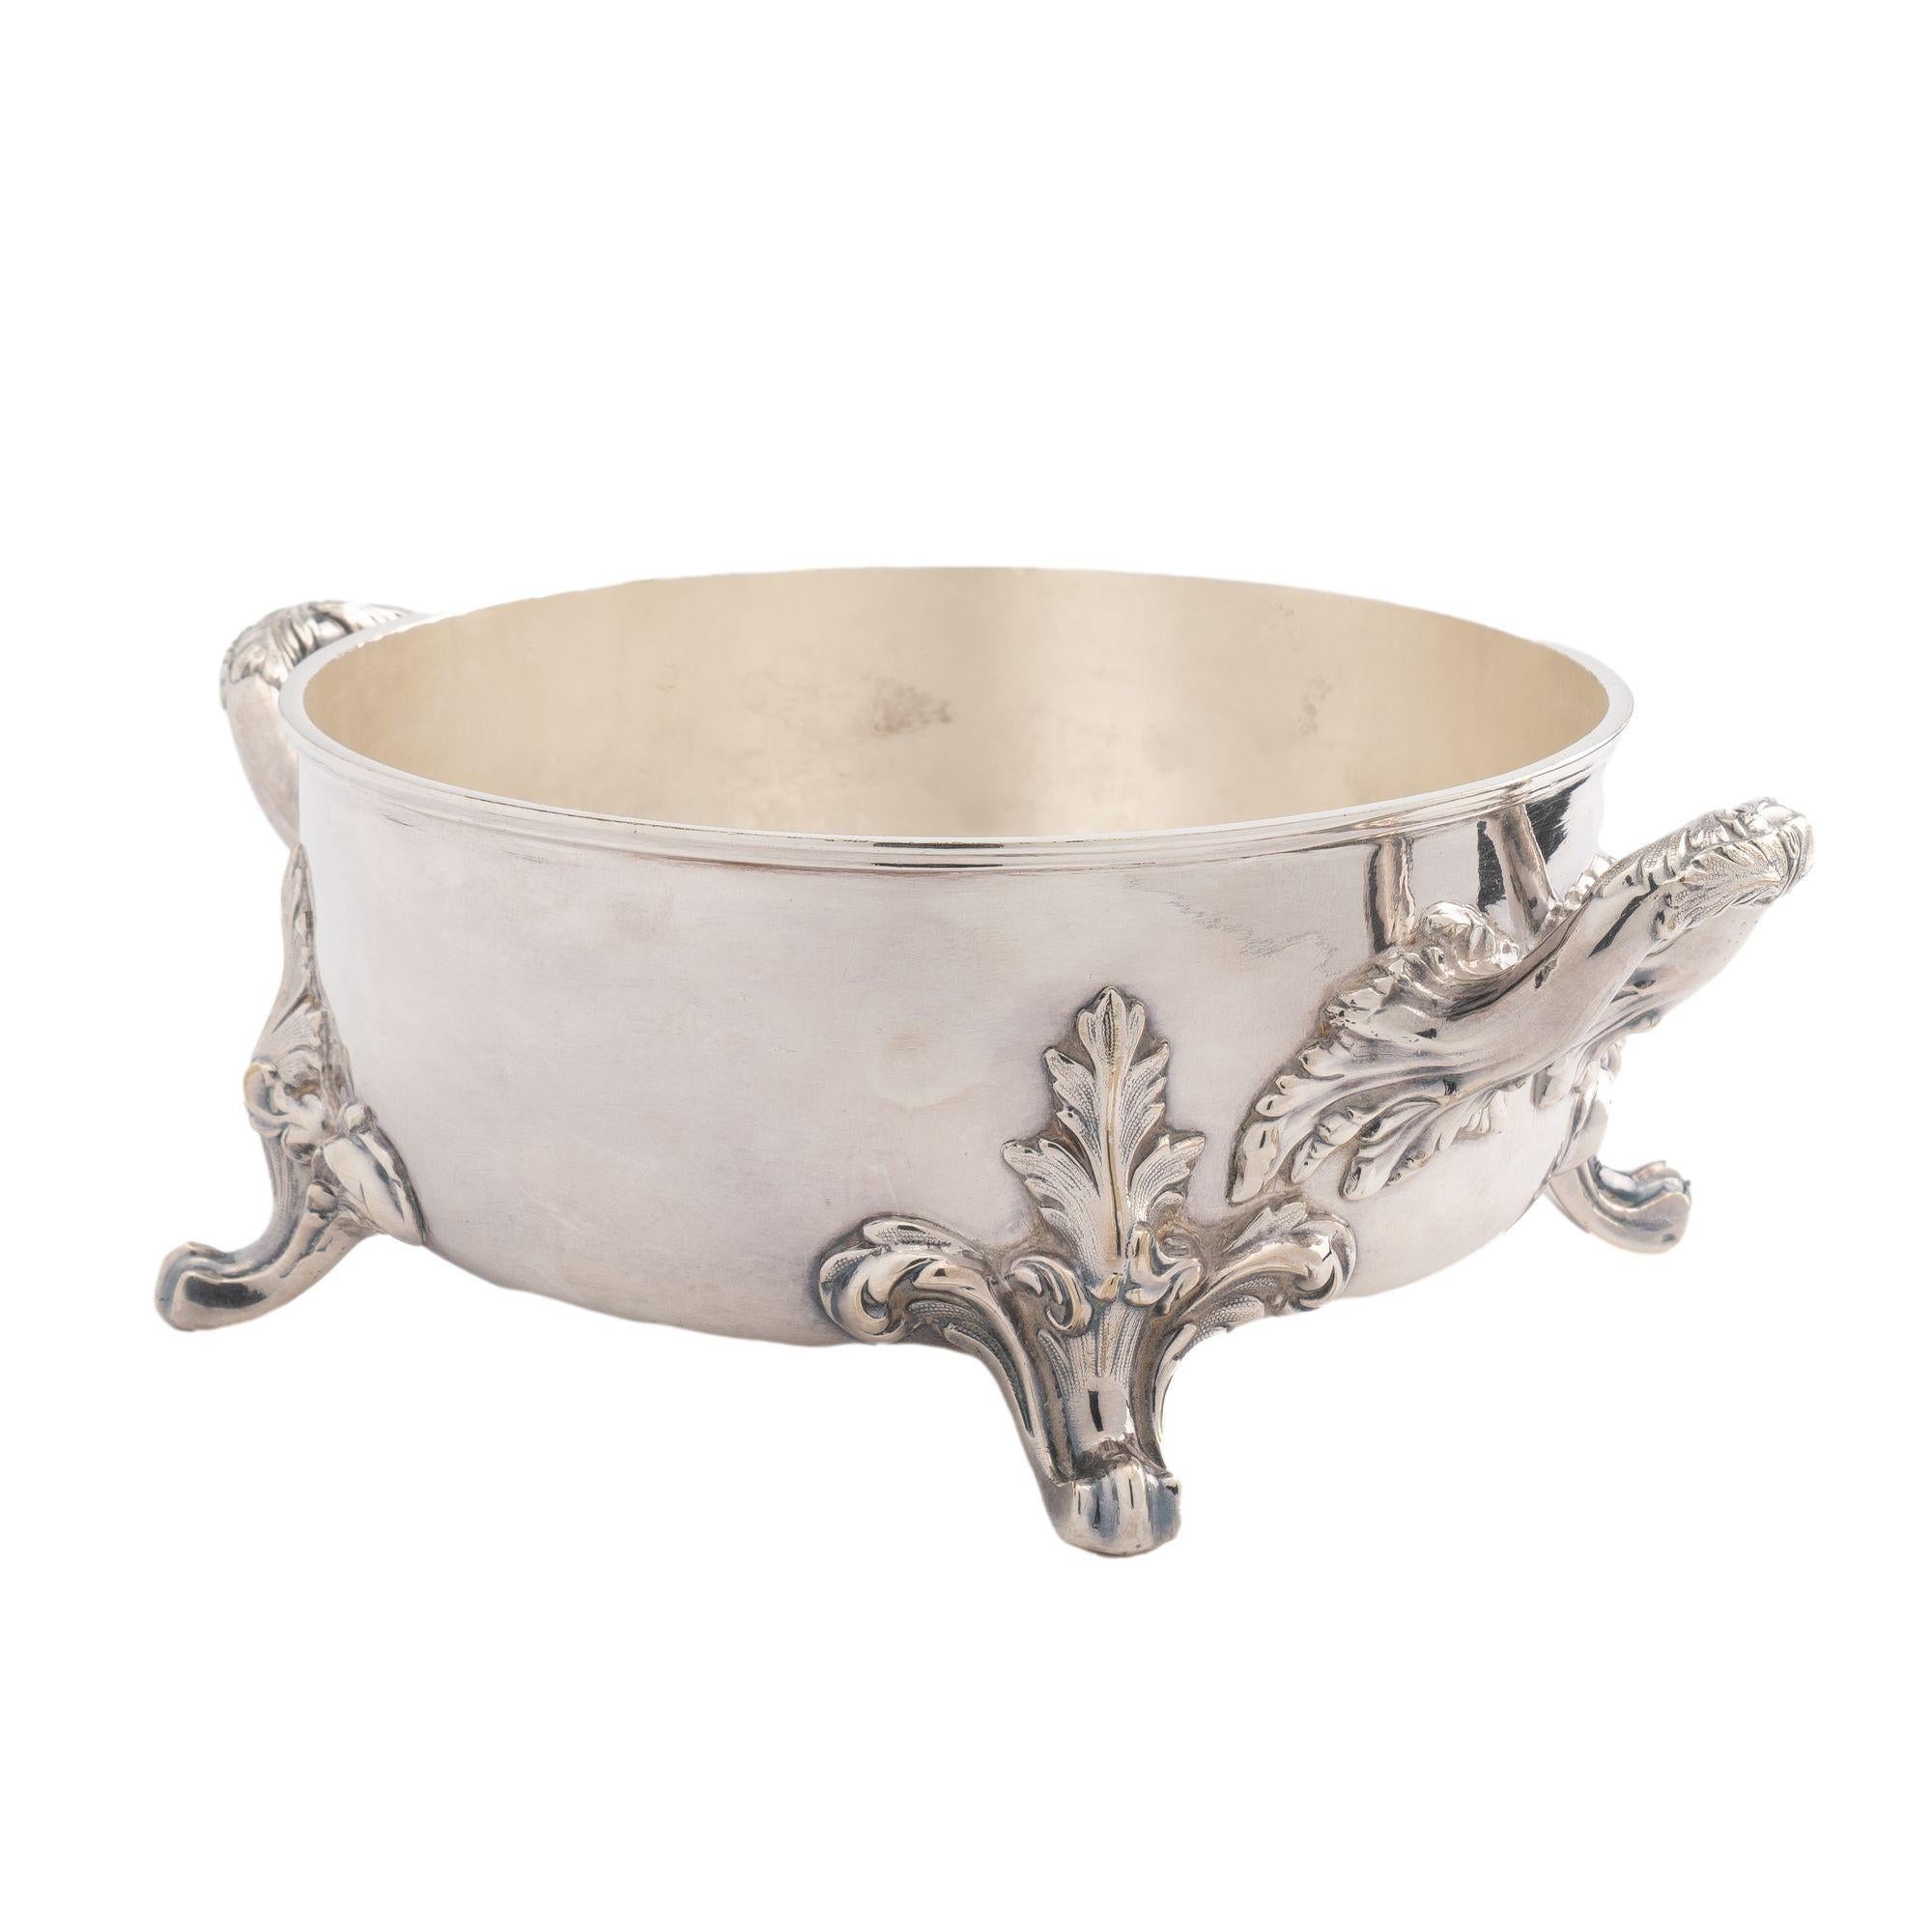 Sterling Silver English Sheffield Dish with Lion’s Paw Feet by Smith, Sissons & Co. '1810-1840' For Sale